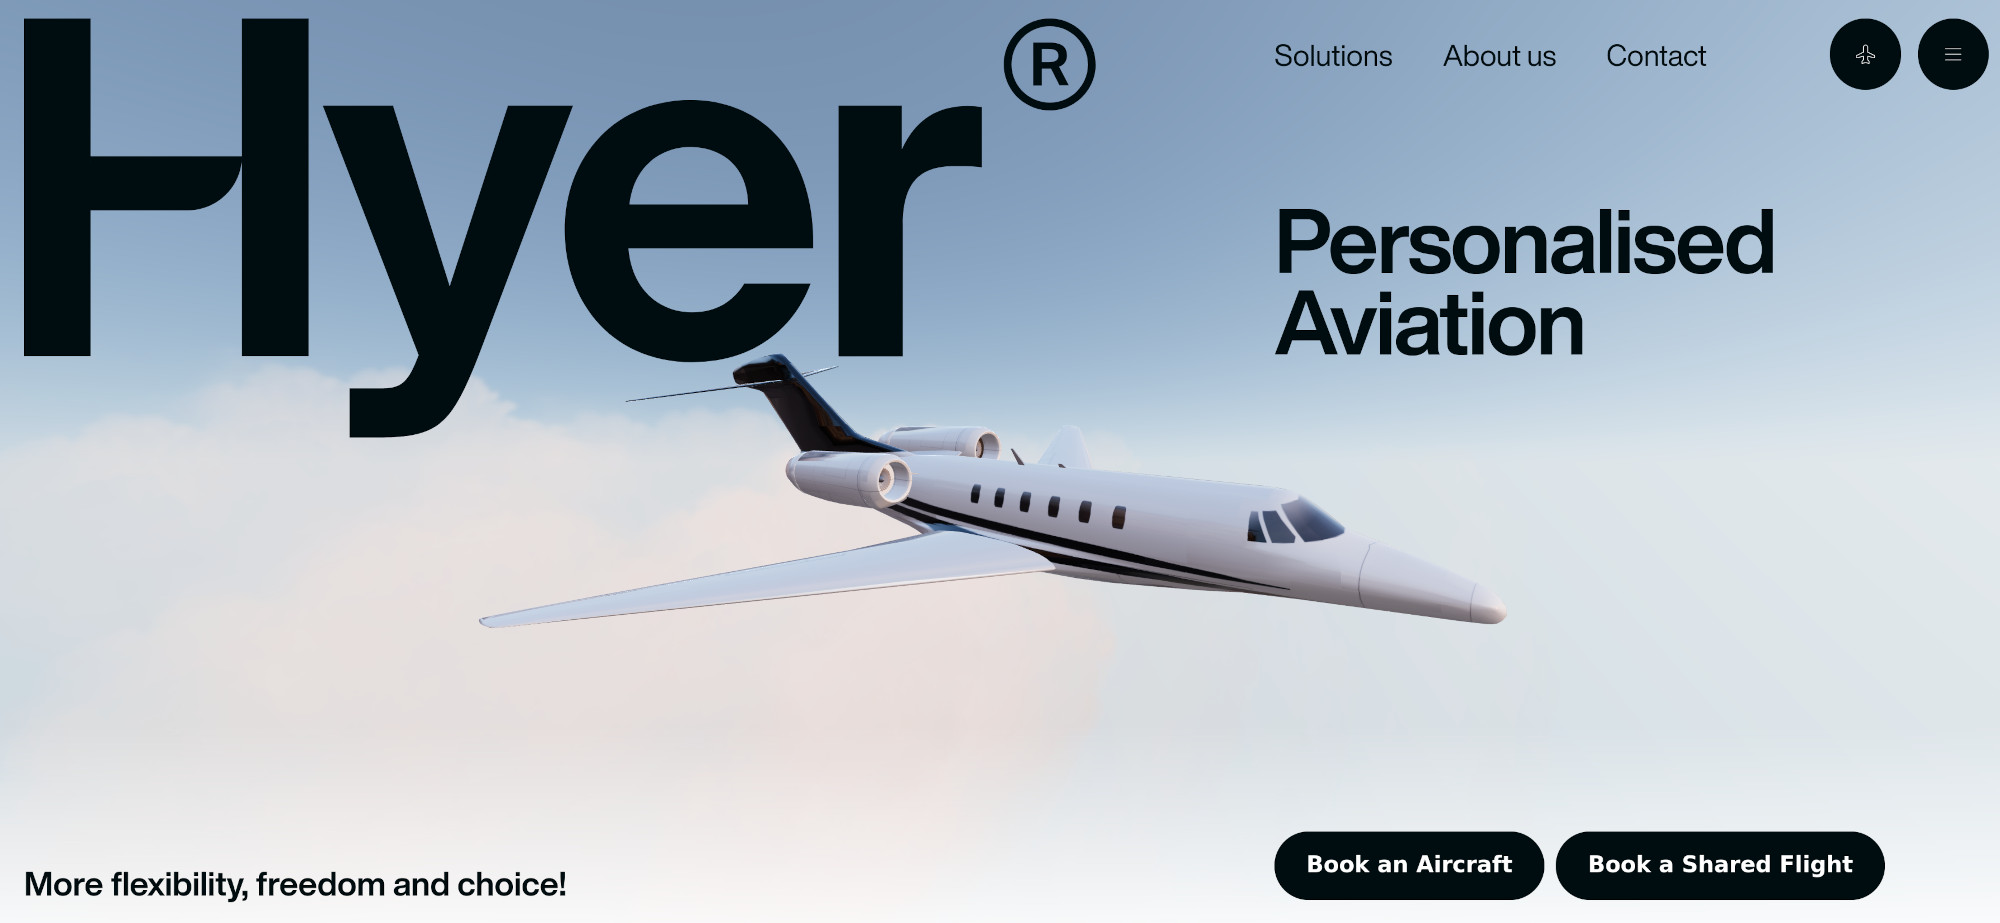 A screenshot of www.flyhyer.com with the Hyher logo on the upper right, a picture of a small airplane on background with a blue sky in the center and various navigation elements in black colour placed bottom and upper right.